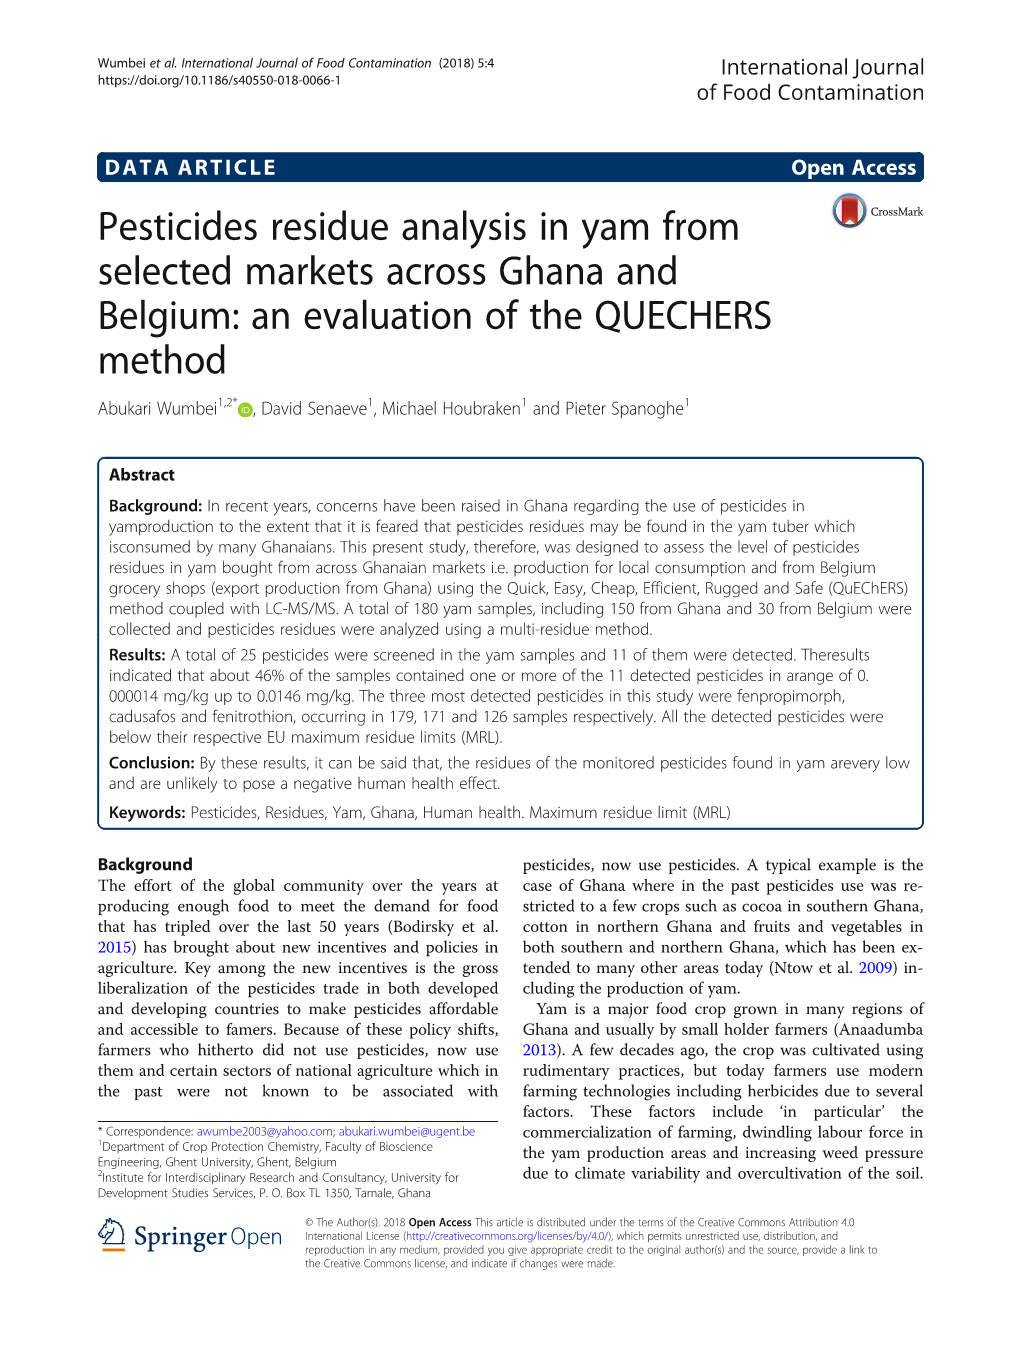 Pesticides Residue Analysis in Yam from Selected Markets Across